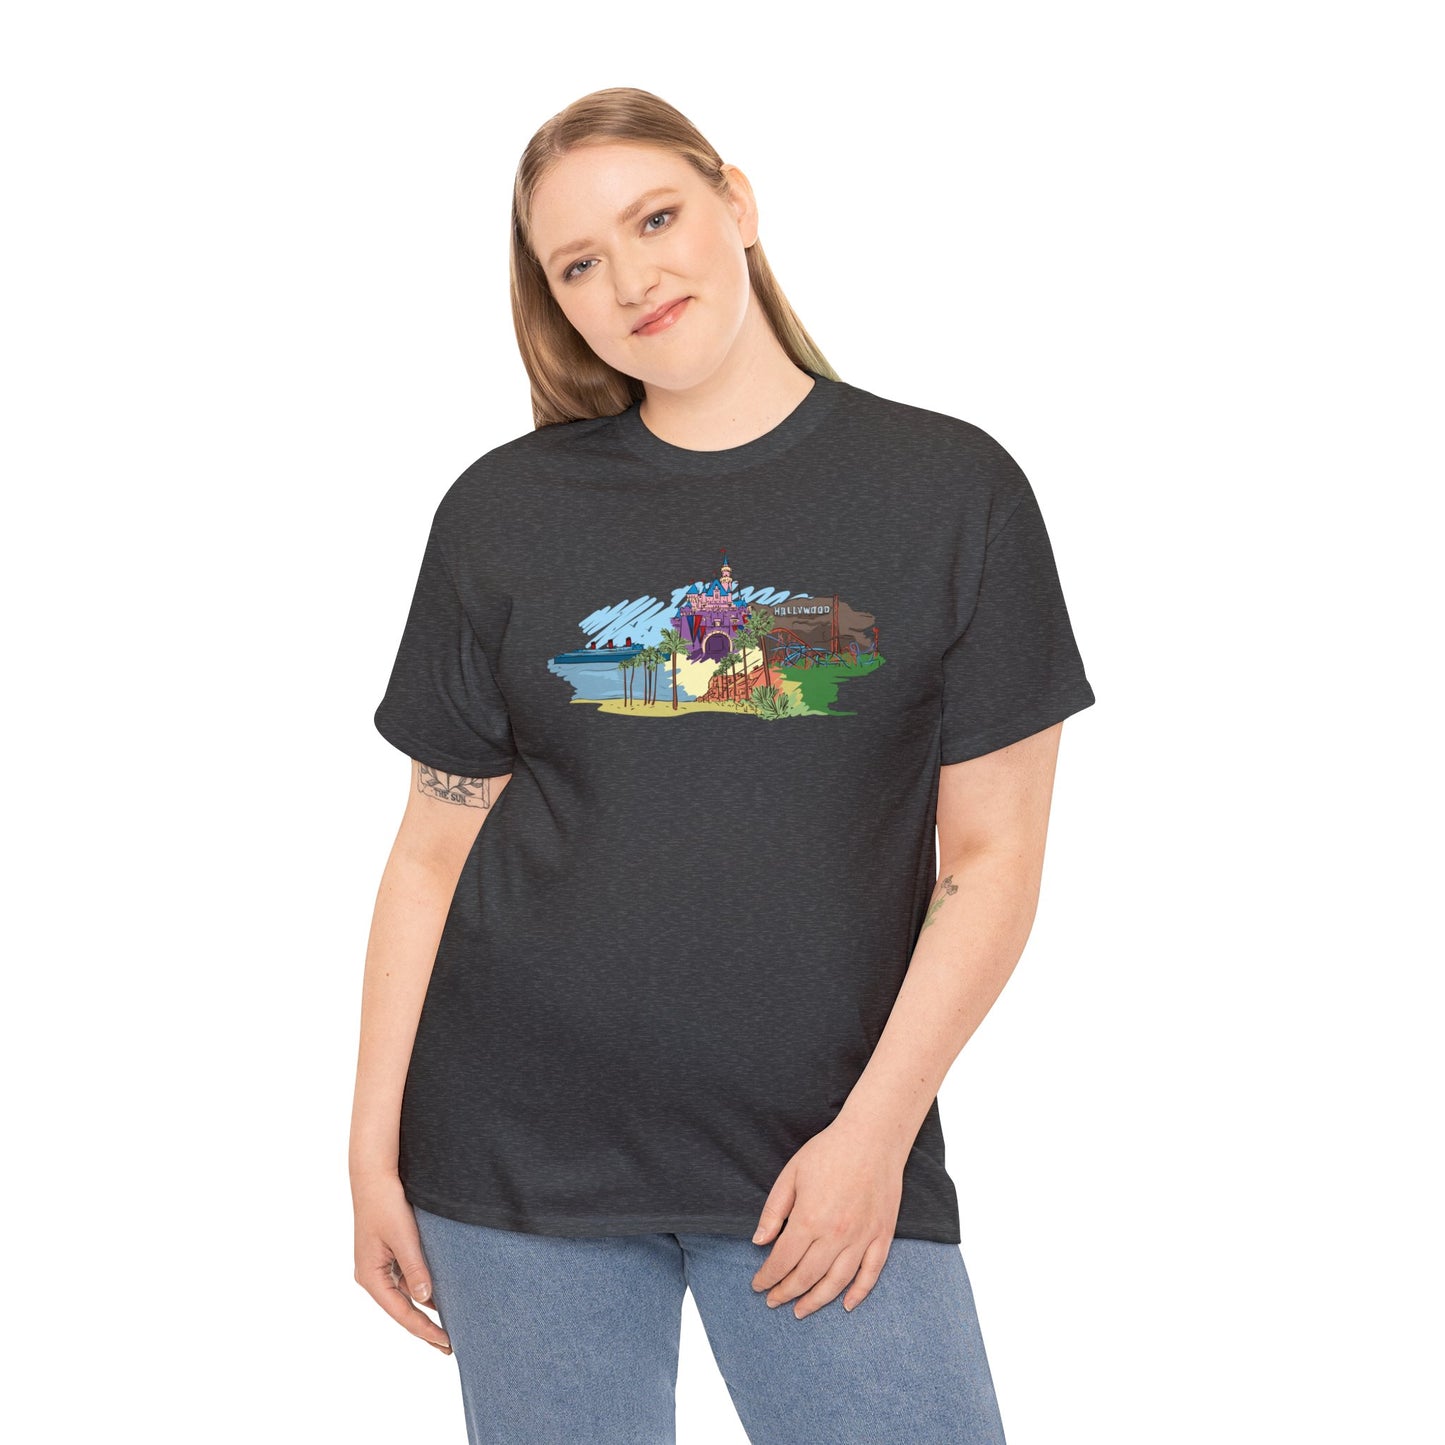 Hollywood Vibes Unleashed: Explore Style and Comfort with Our Exclusive T-shirt!